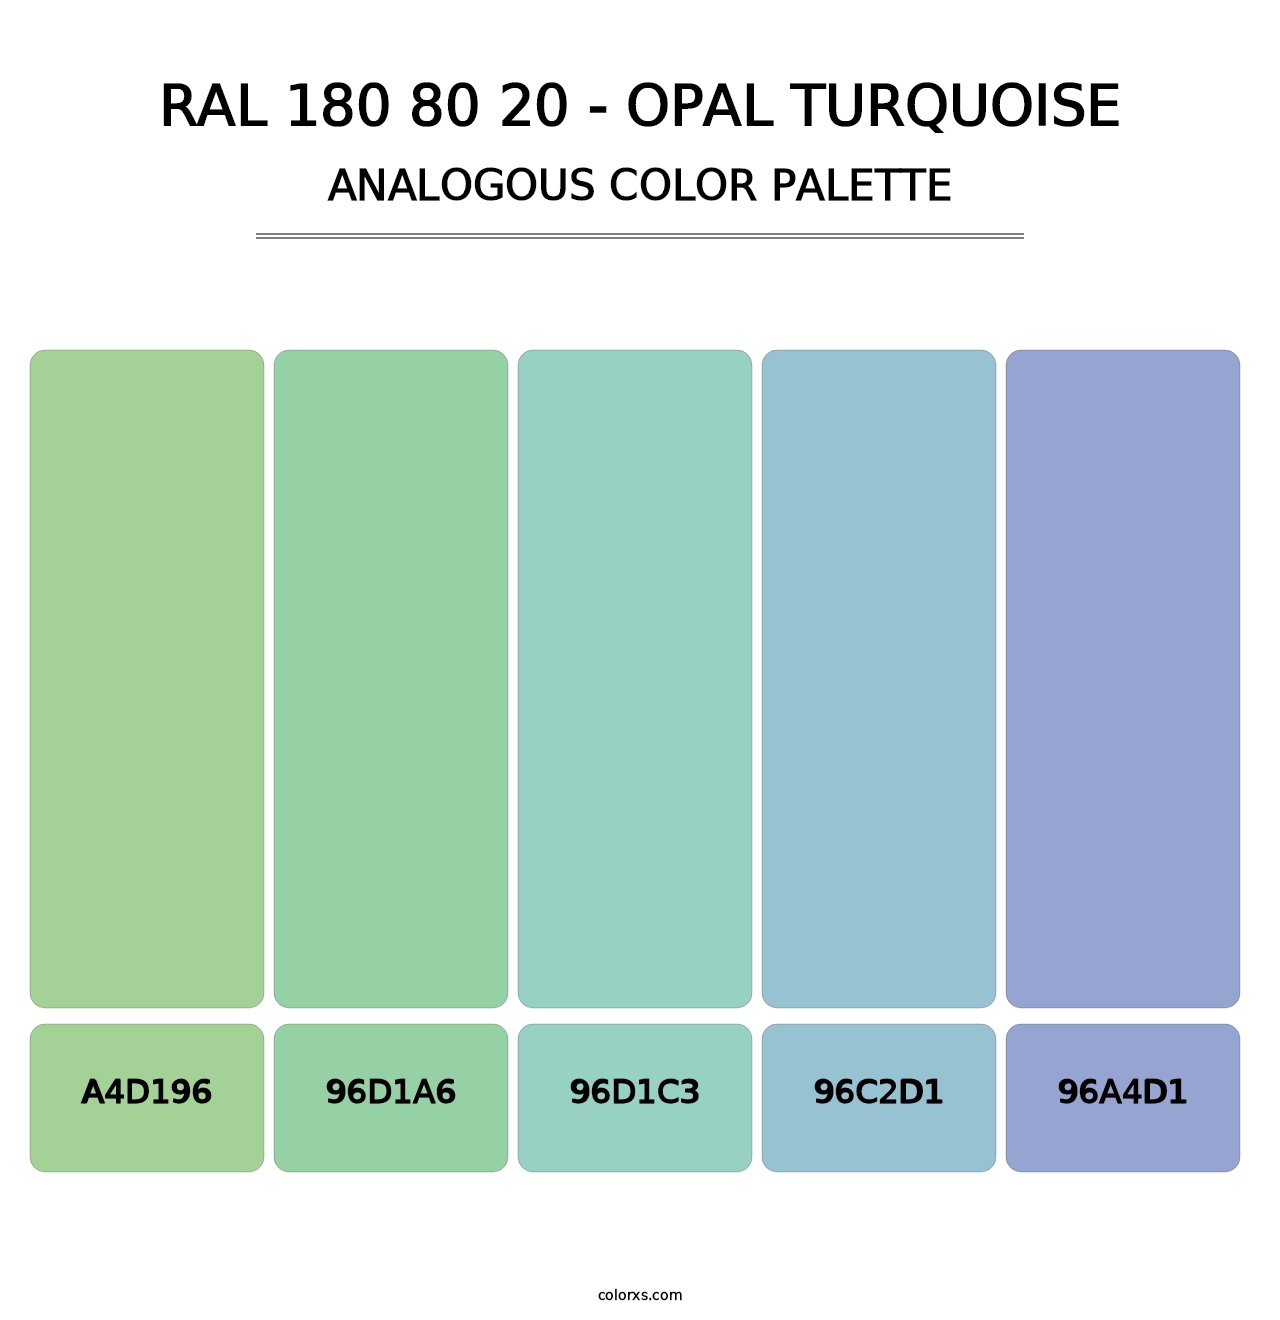 RAL 180 80 20 - Opal Turquoise - Analogous Color Palette